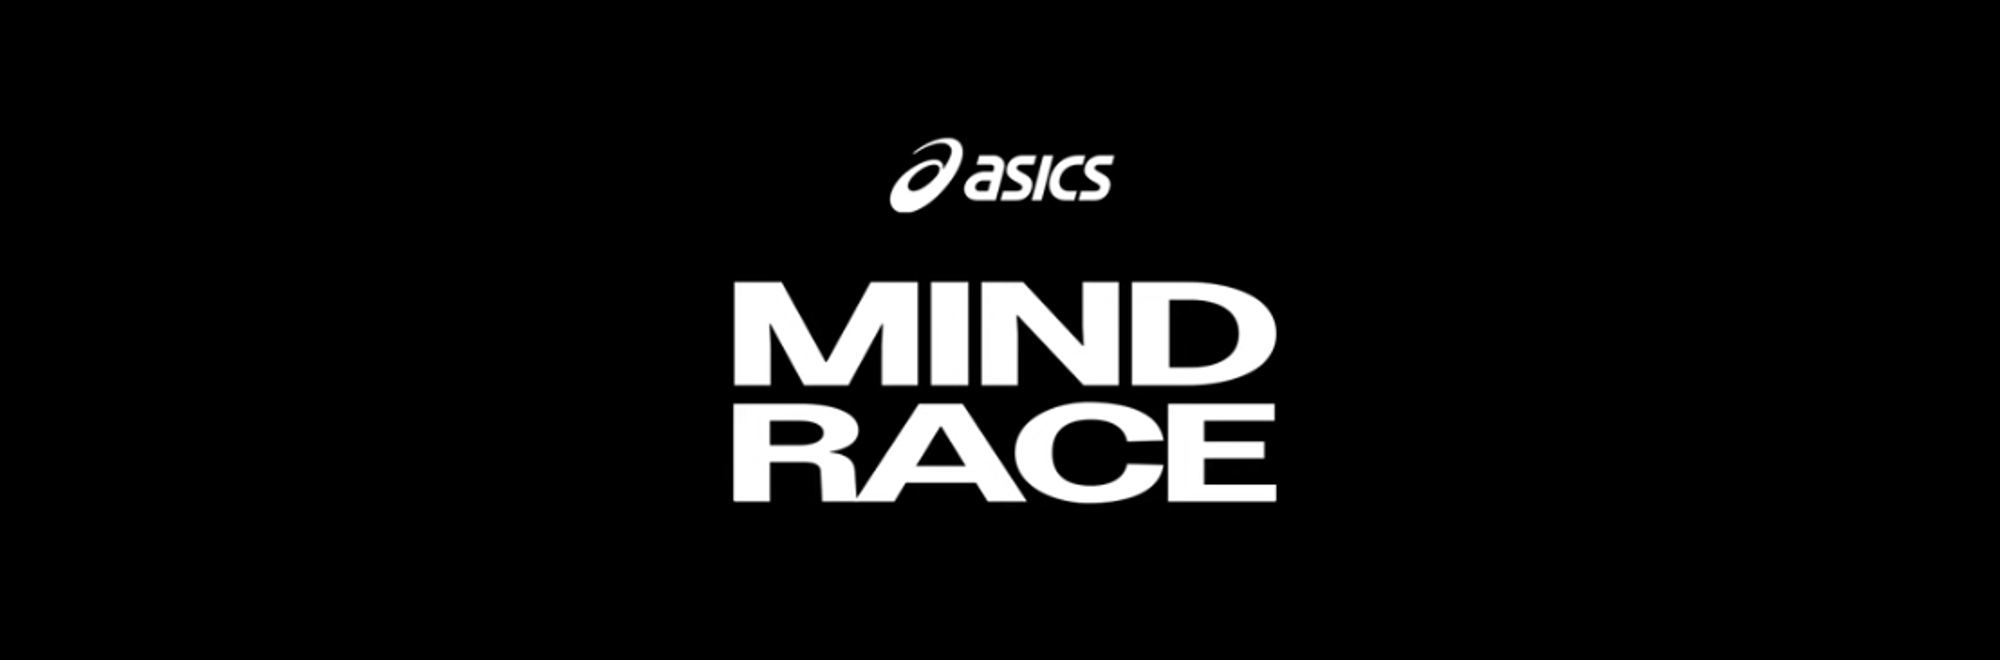 Asics' ‘Mind Race’ experiment highlights the negative impact of a week without exercise